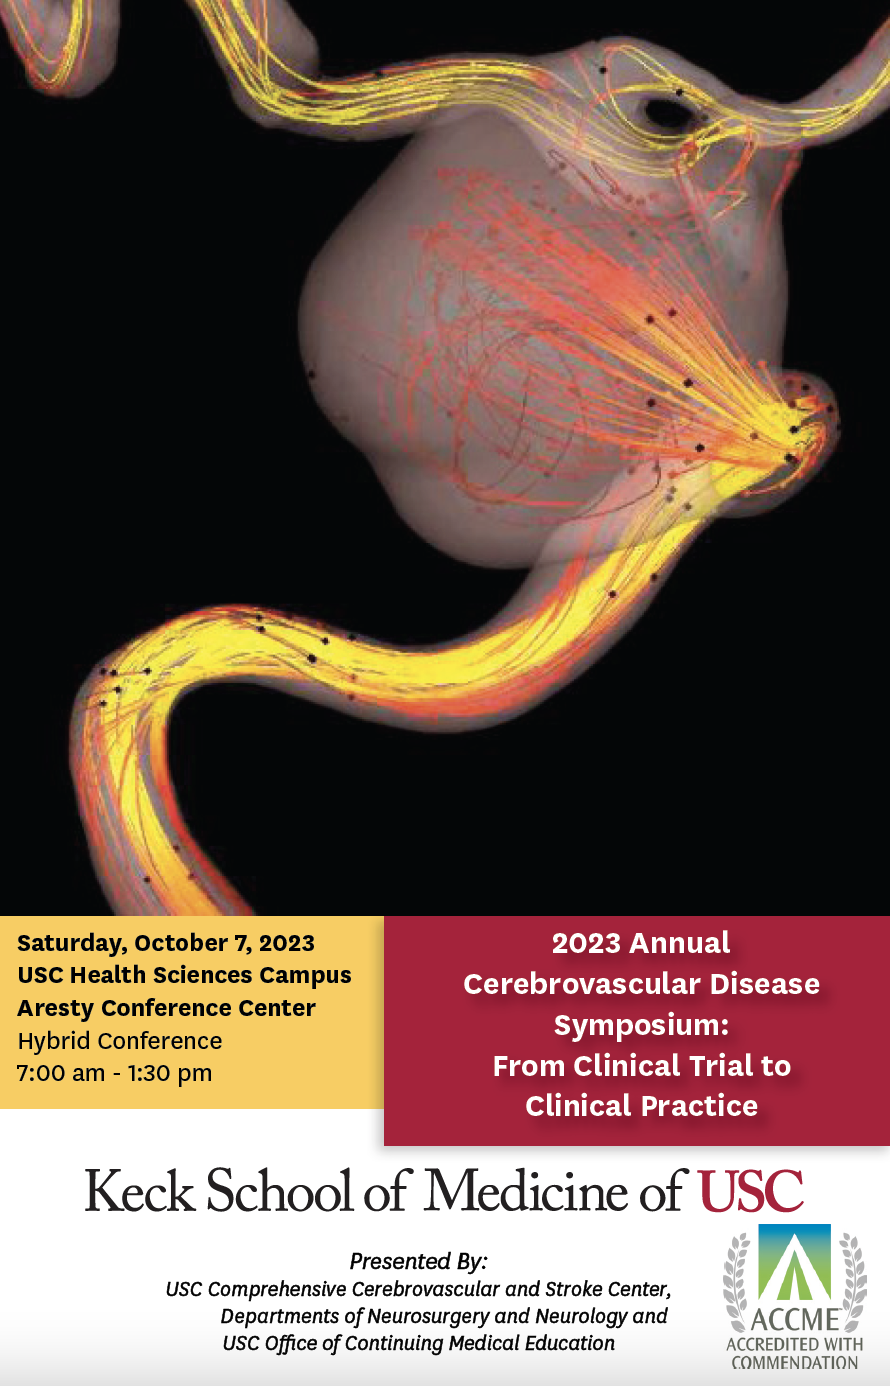 2023 Annual Cerebrovascular Disease Symposium: From Clinical Trial to Clinical Practice Banner